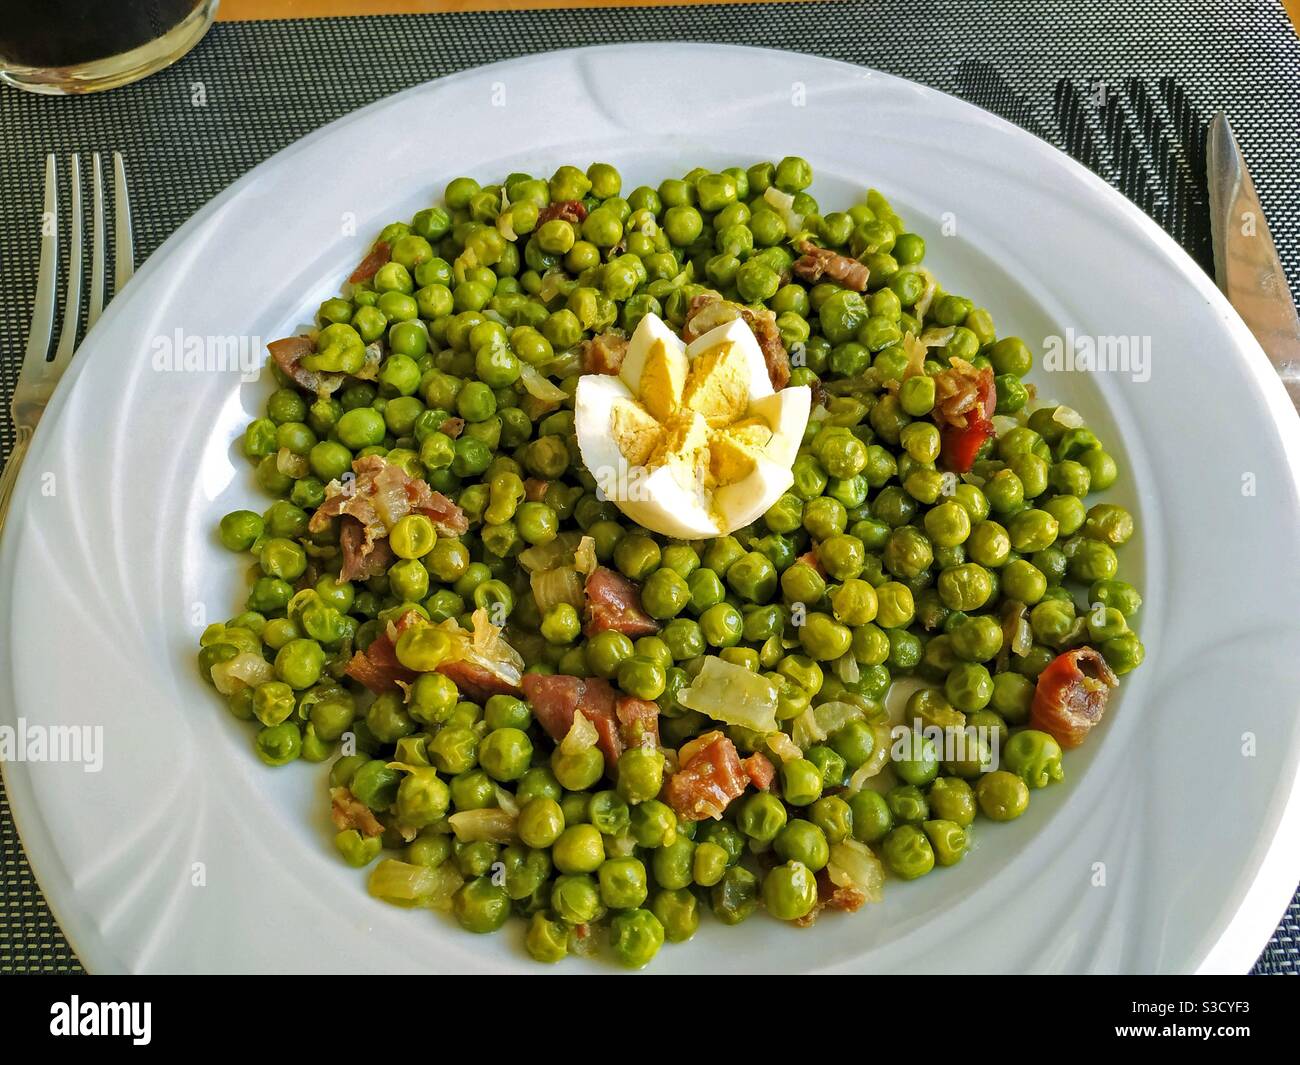 Peas with ham and egg. Stock Photo